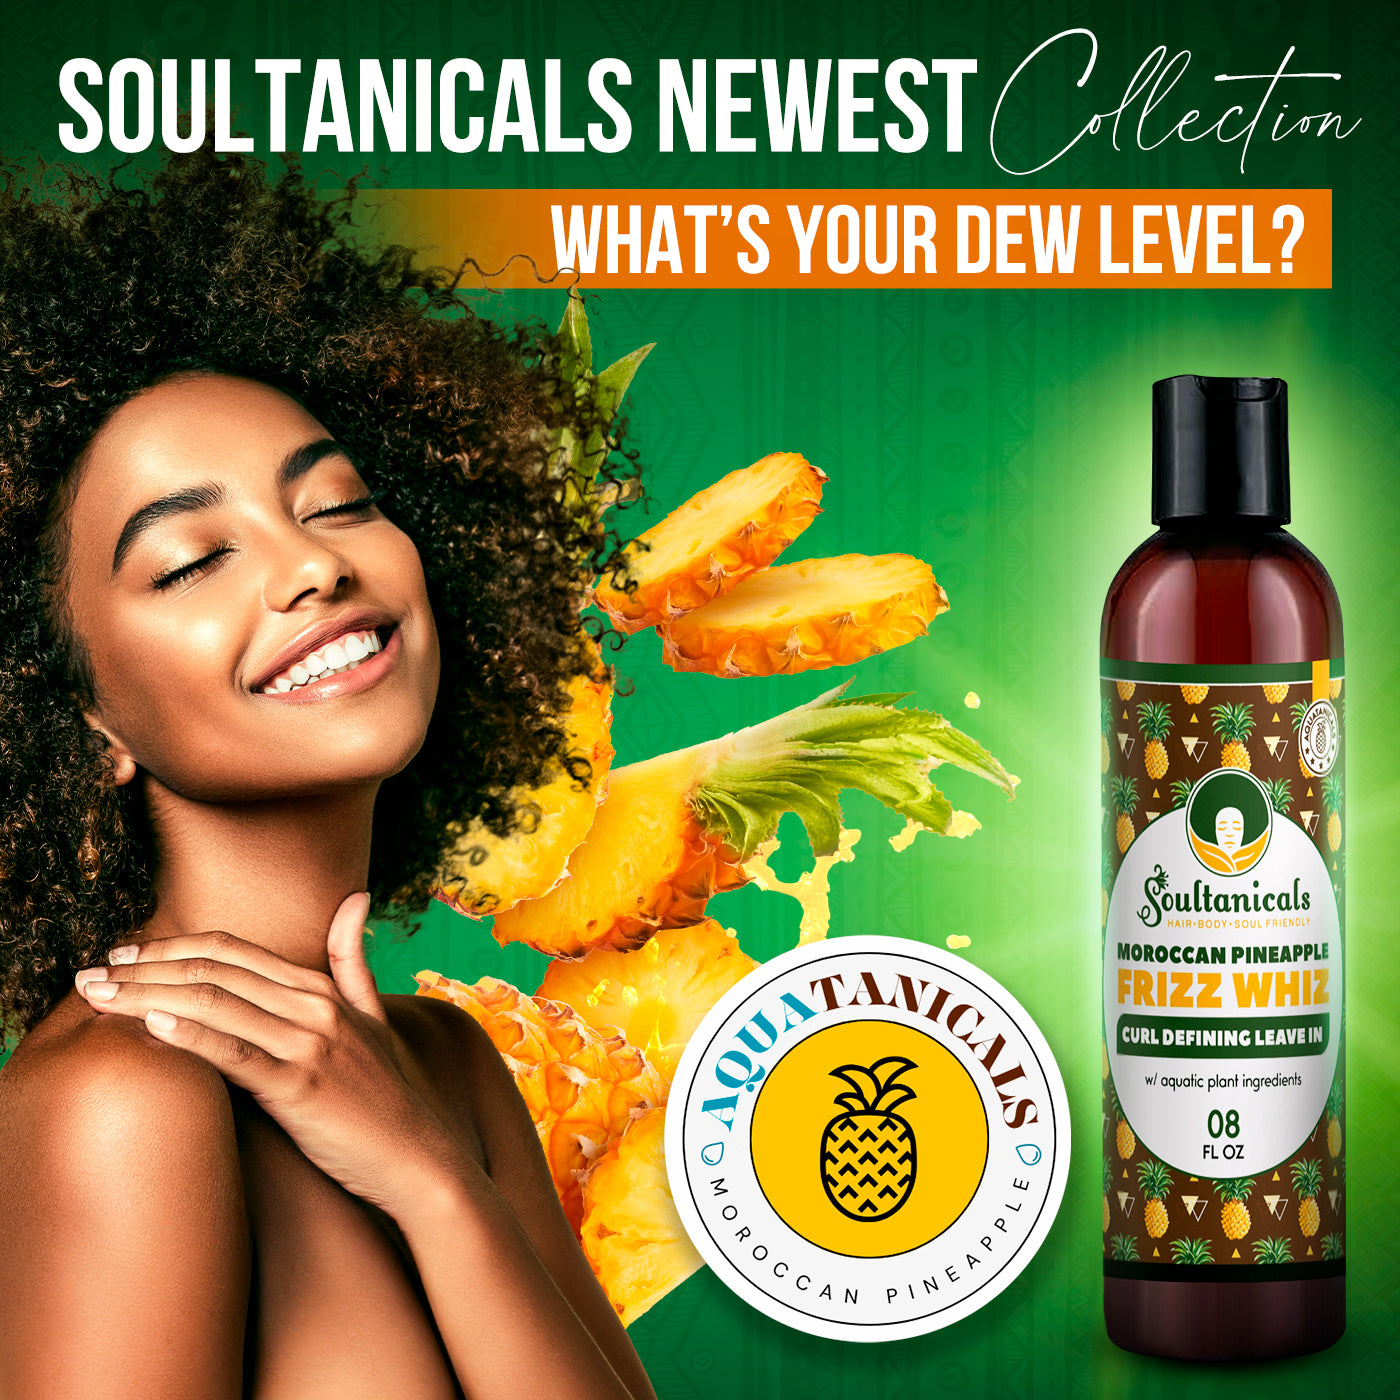 AQUATANICALS- Moroccan Pineapple Frizz Whiz, Curl Defining Leave-In